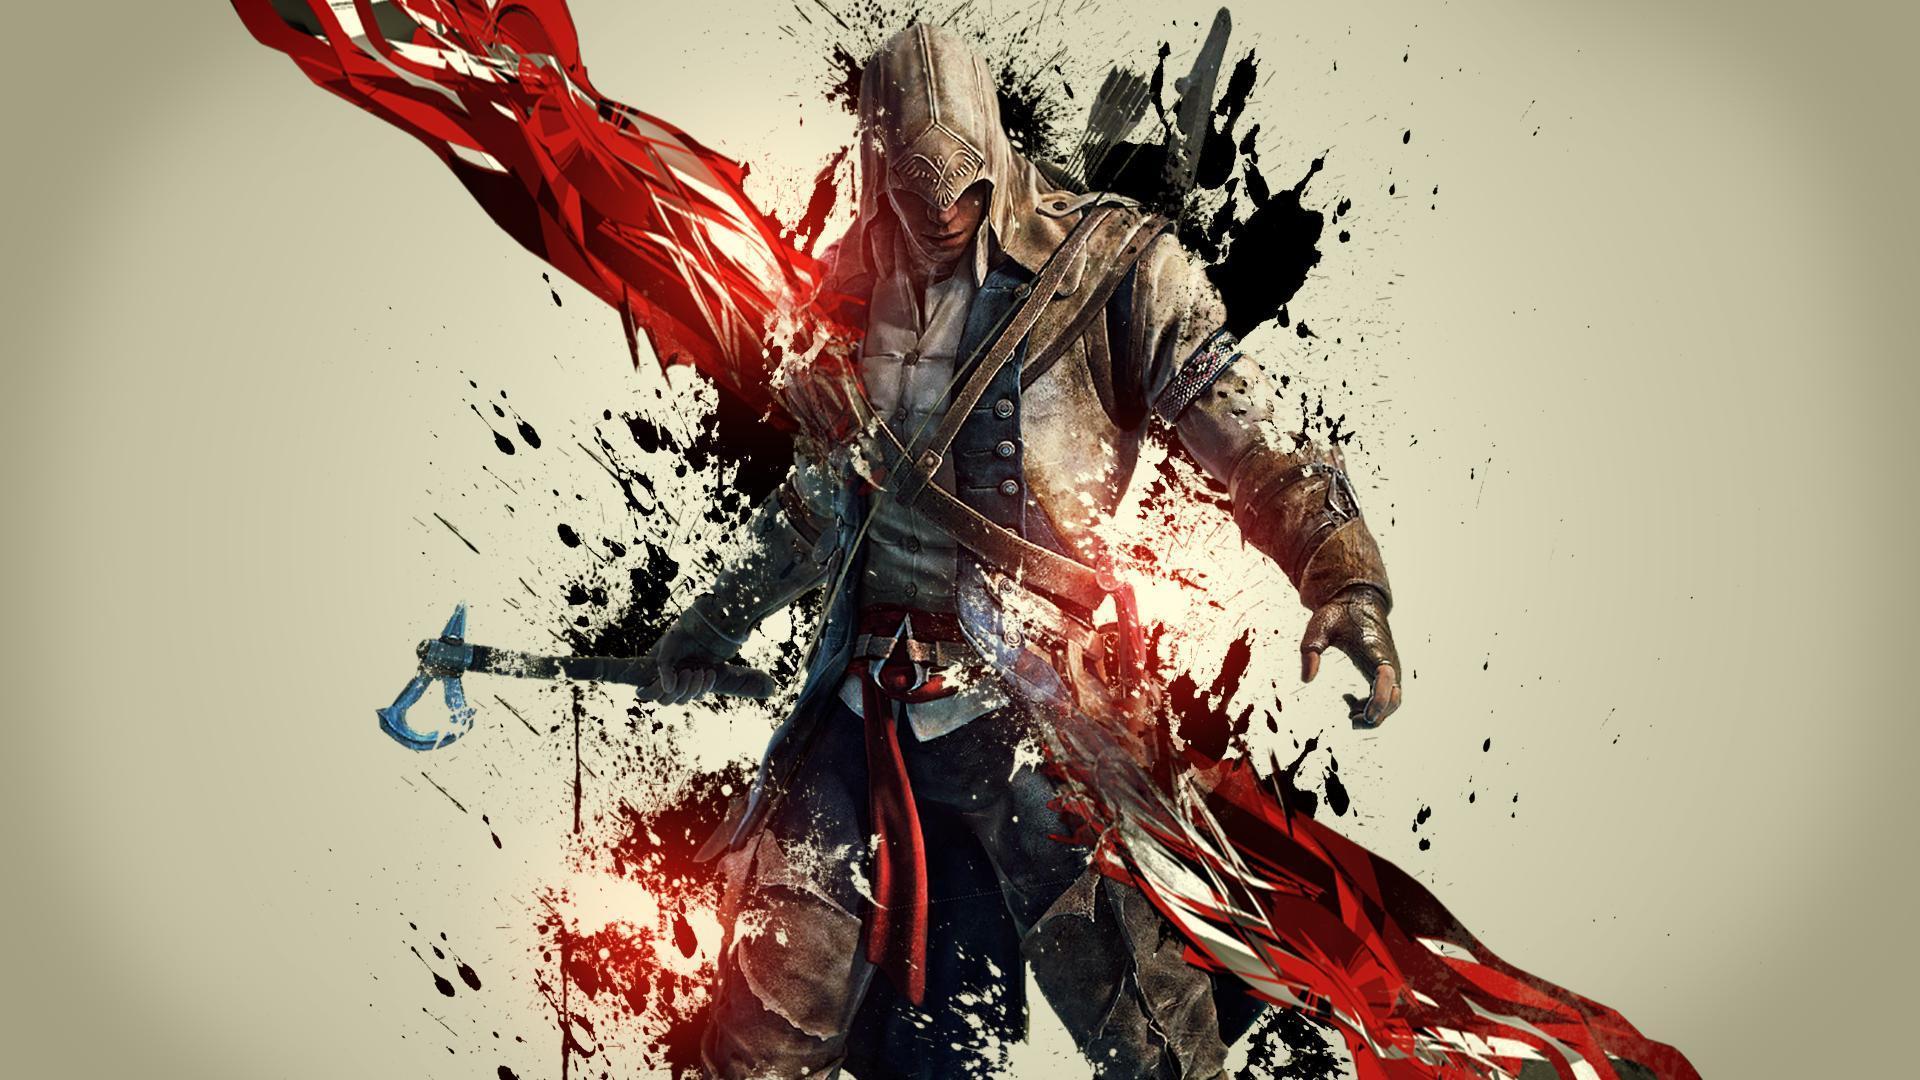 Assassin&;s Creed 3 Wallpaper Gameplay (4157) Game